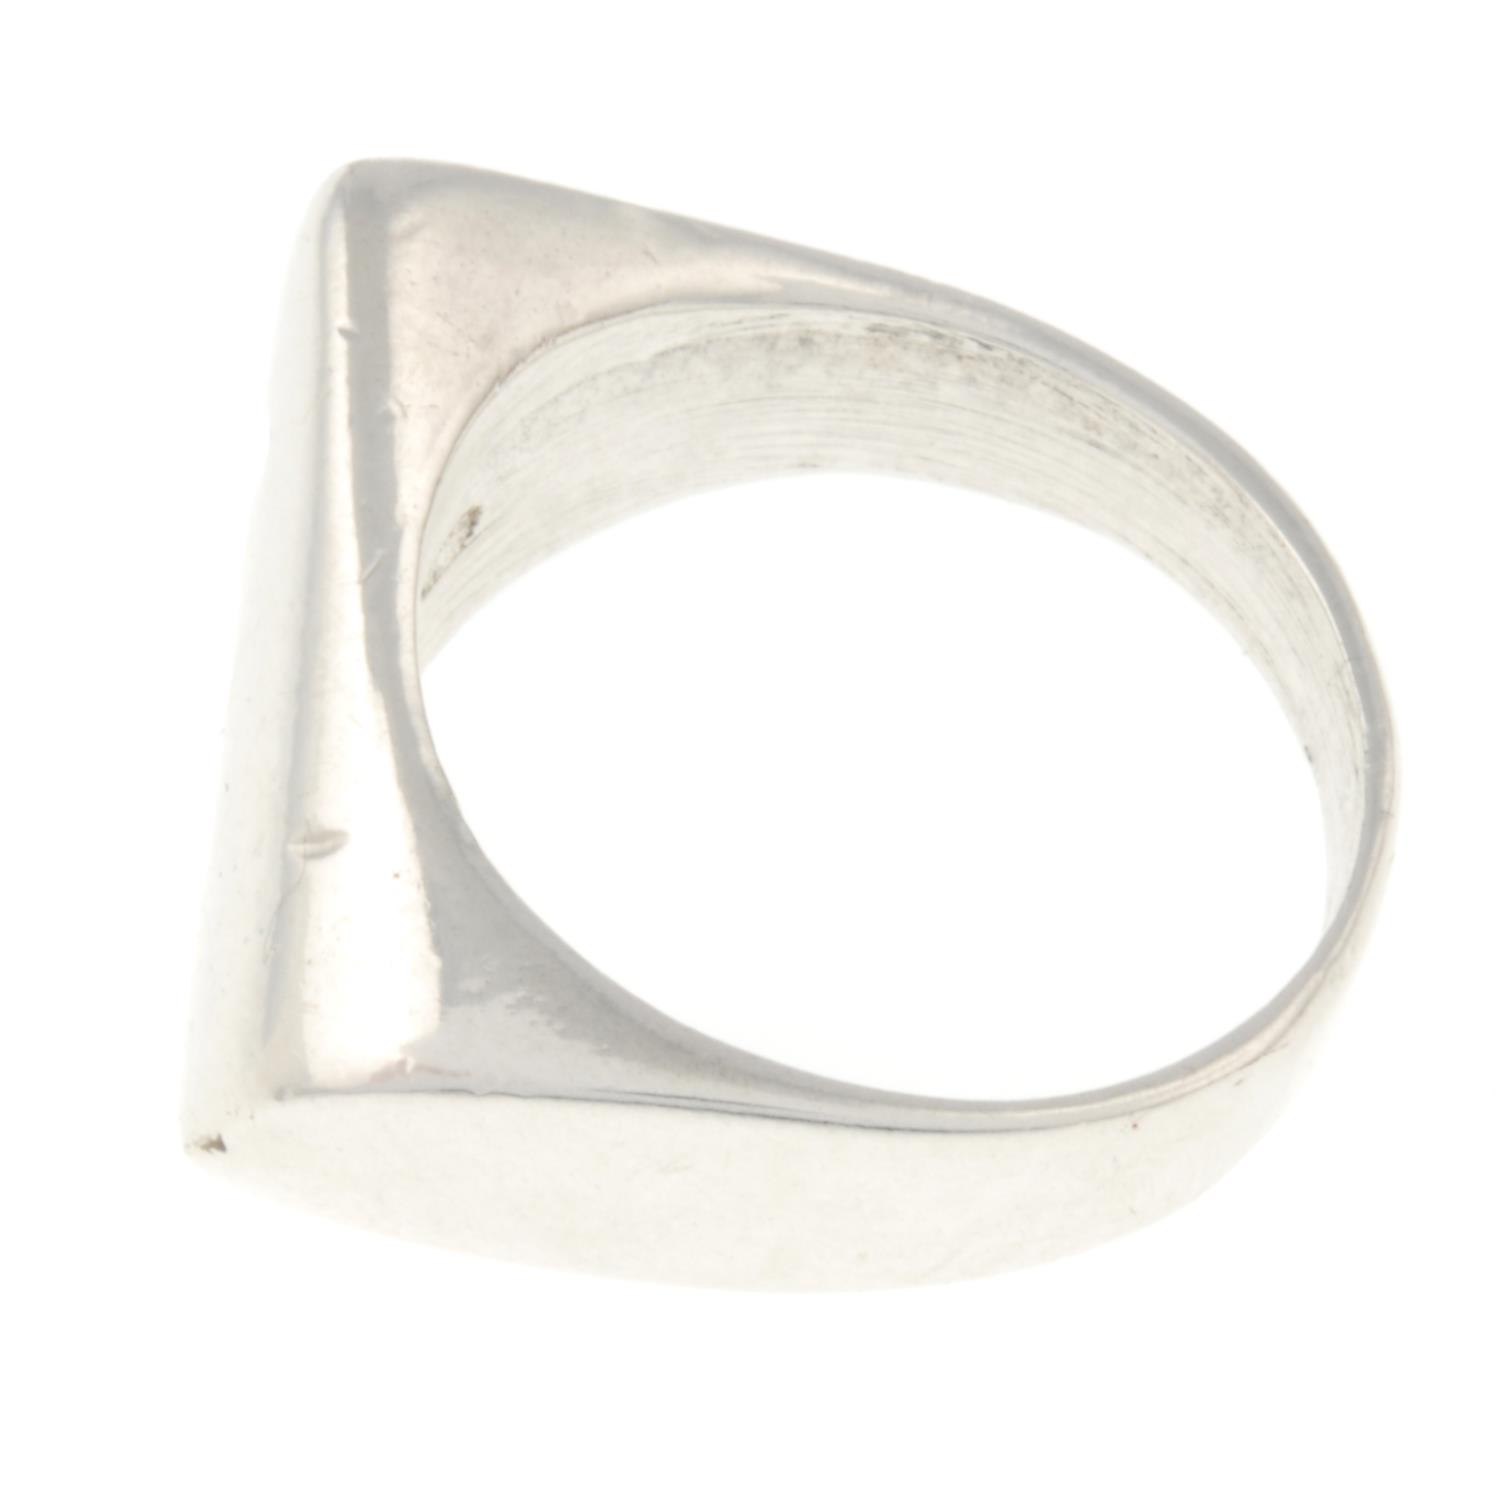 A 'Plaza' ring, by Henning Koppel, for Georg Jensen. - Image 2 of 3